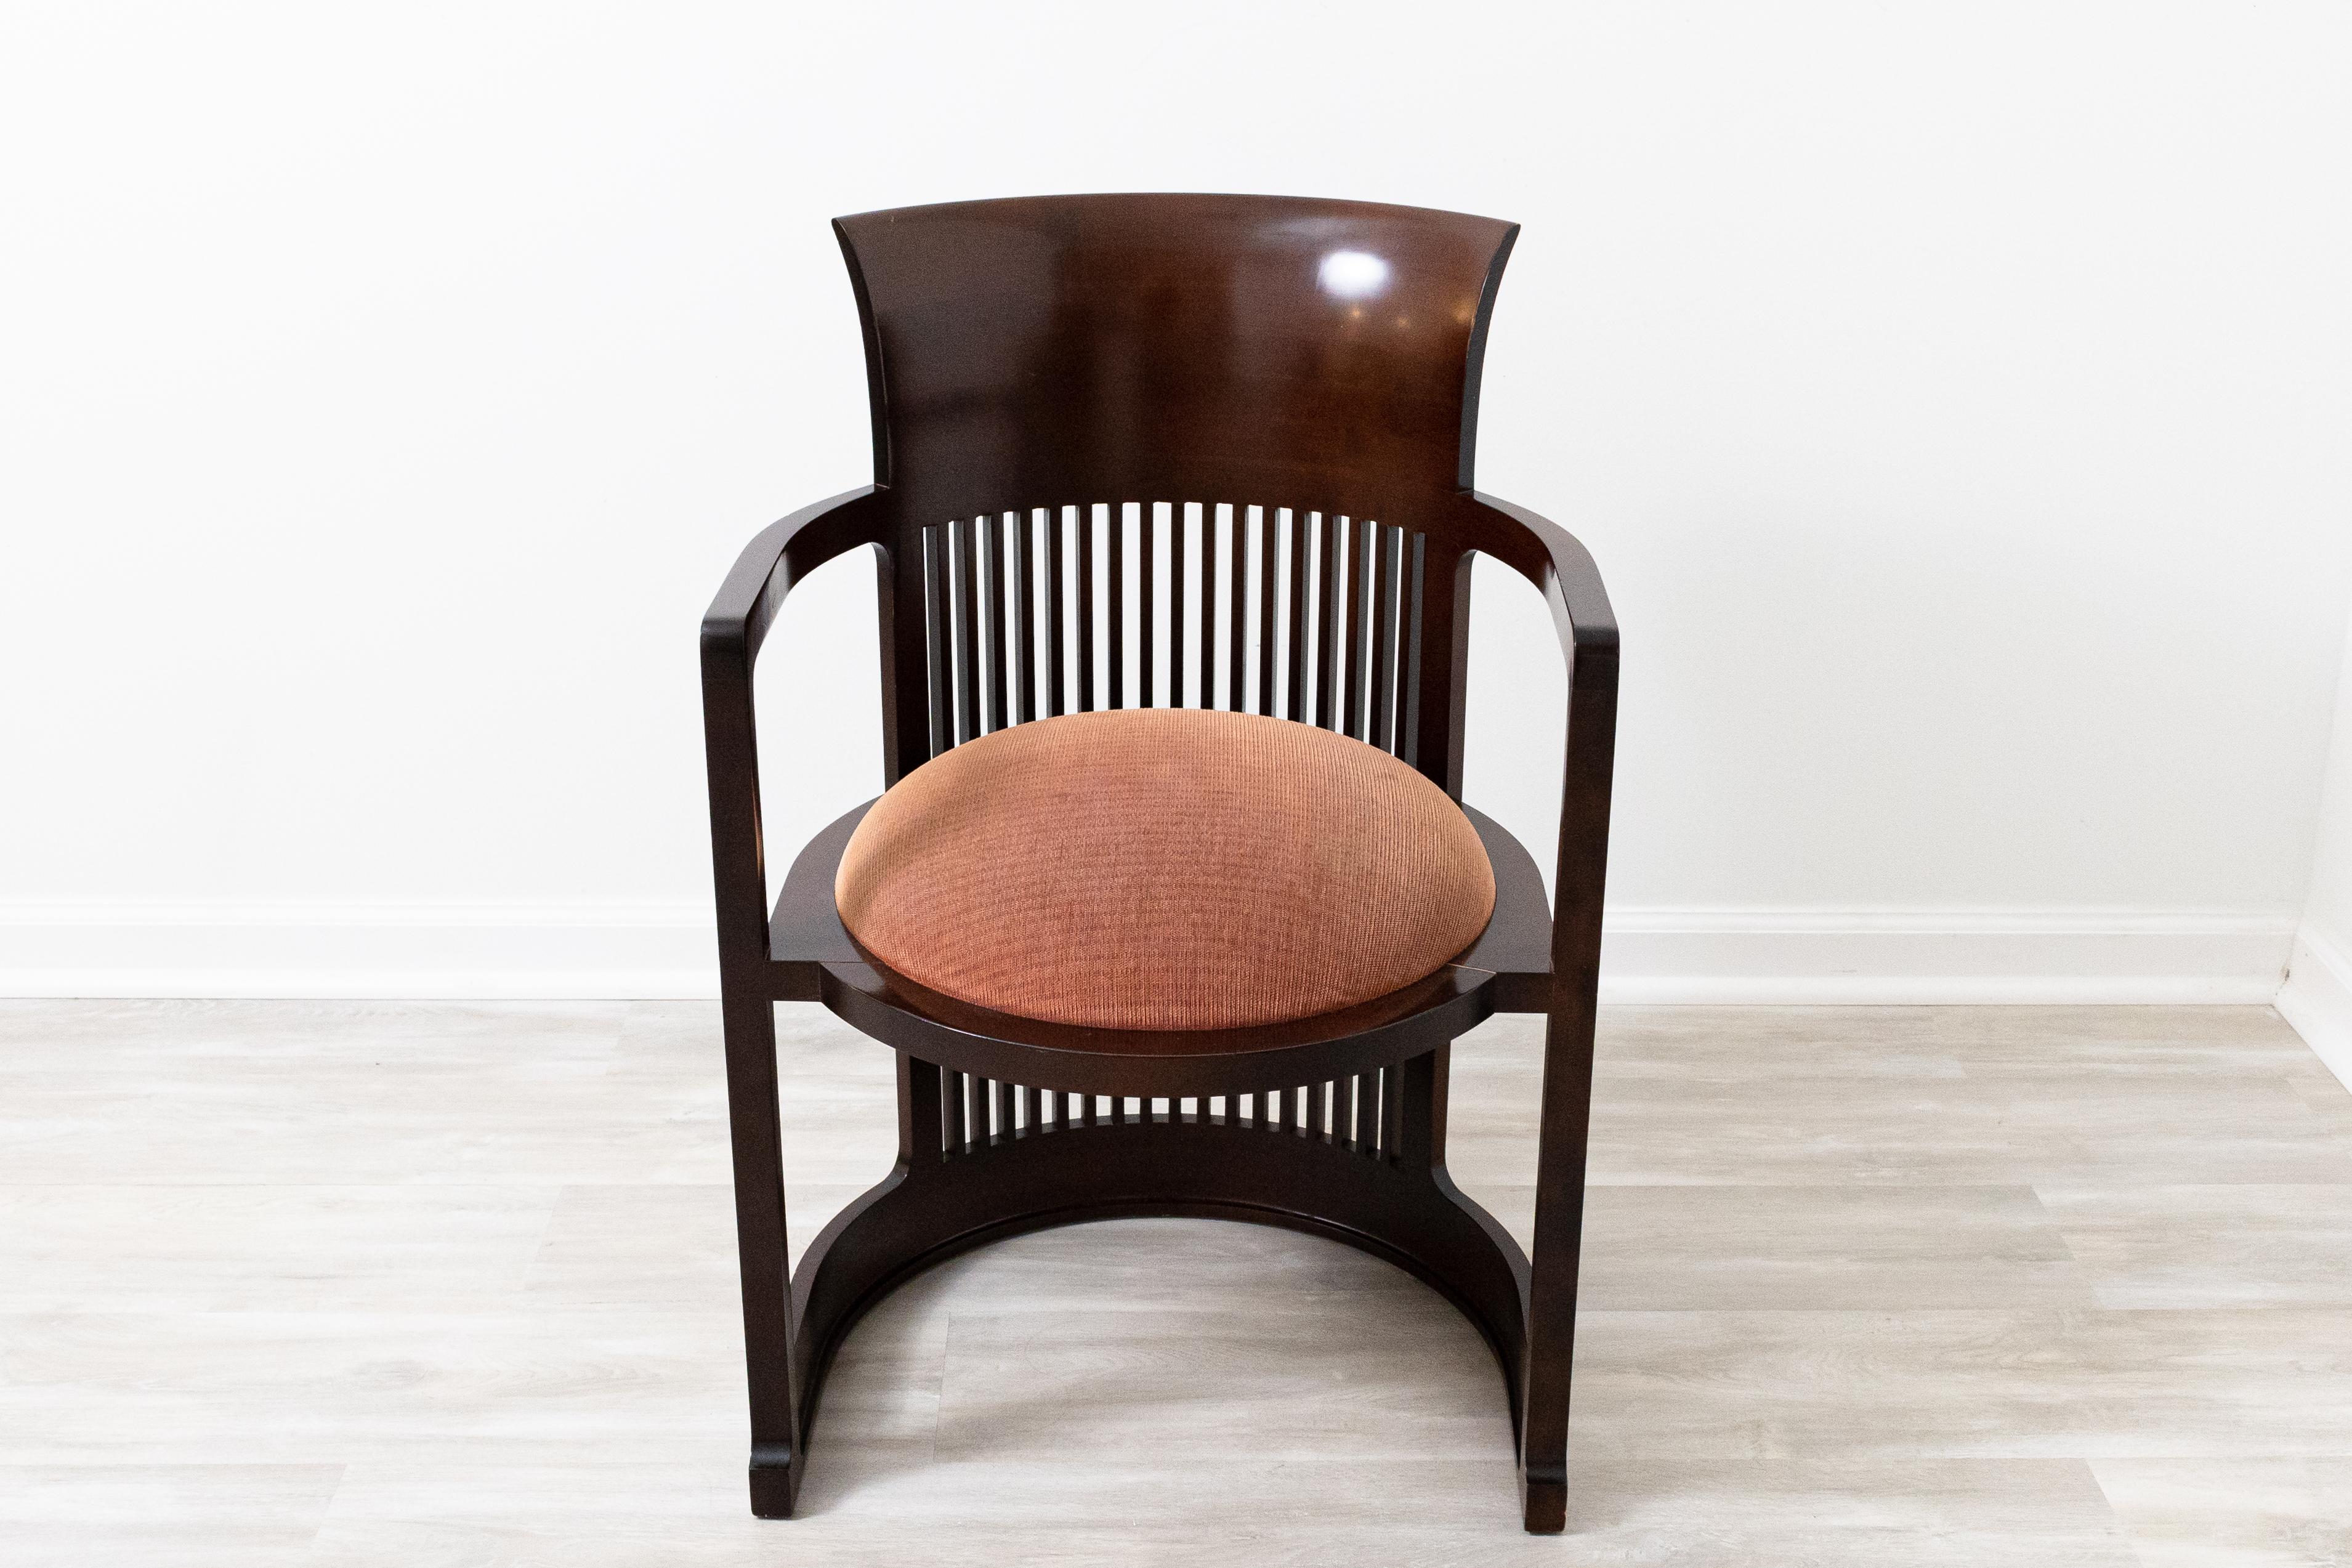 Set of 6 beautiful barrel chairs designed by Frank Lloyd Wright by Cassina.Chairs designed by Frank Lloyd Wright in 1937, relaunched in 1986.
Manufactured by Cassina in Italy. The chairs are In very good condition. The upholstery is in fair